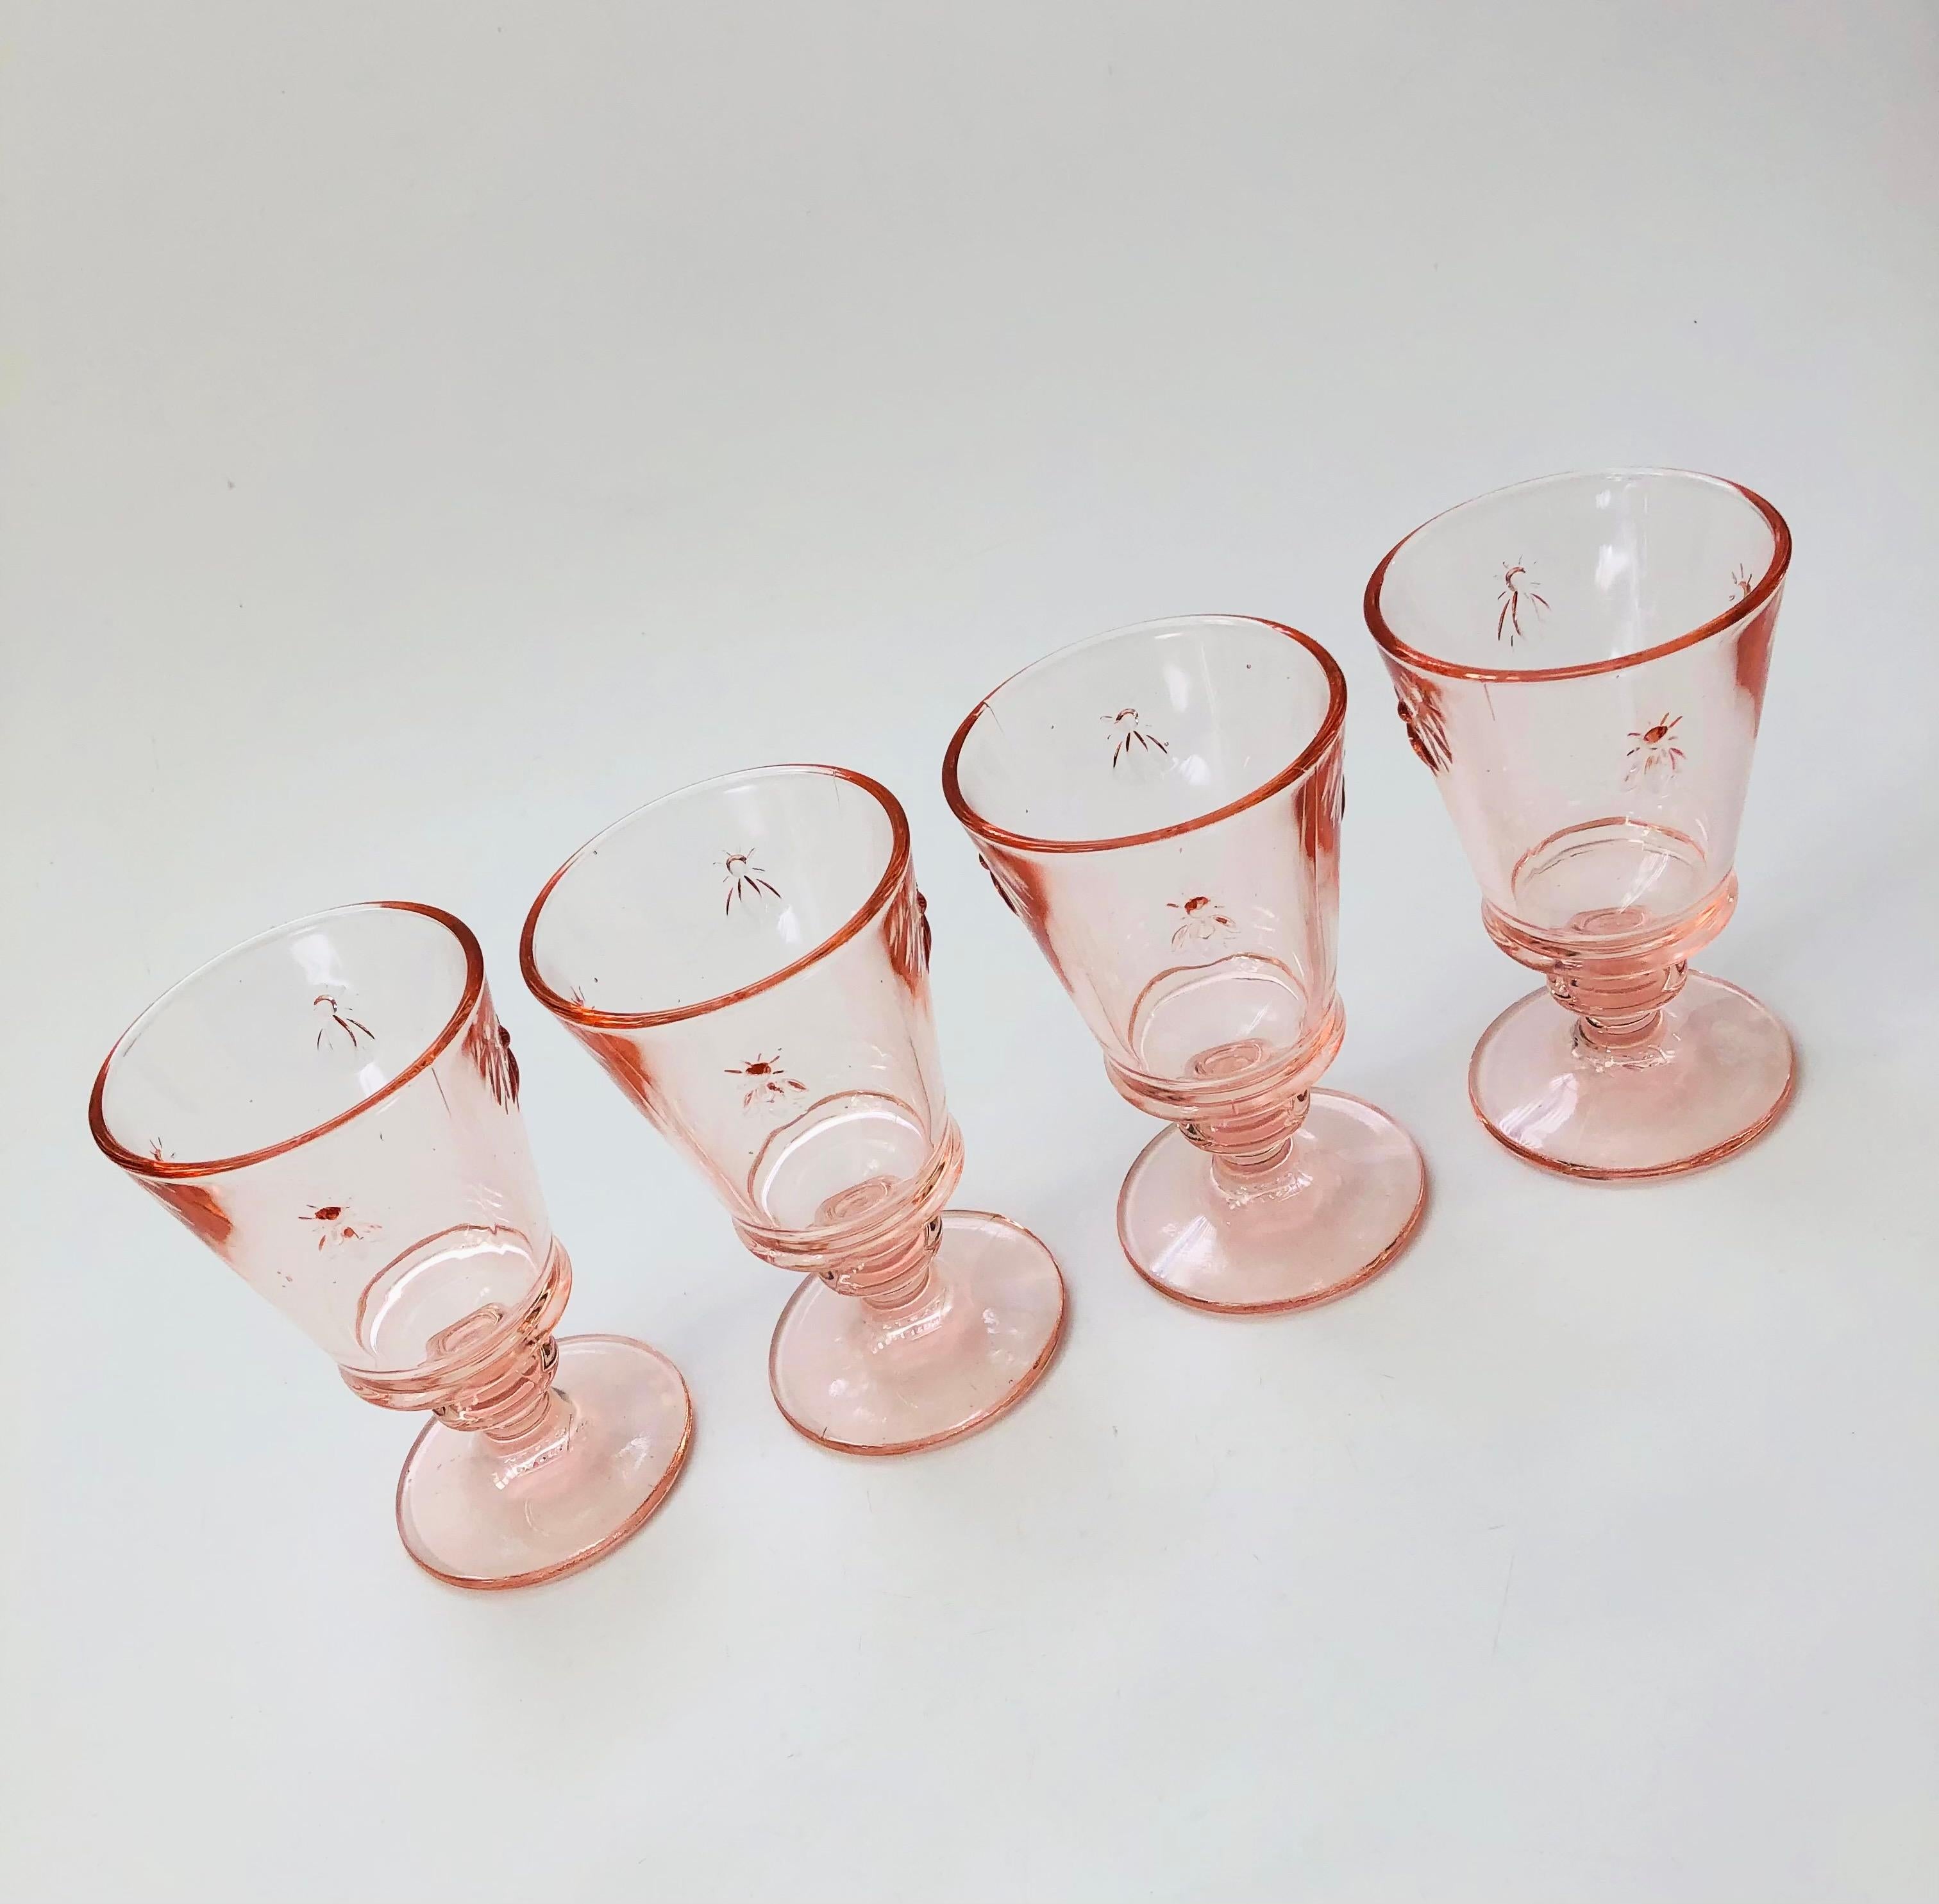 A set of 4 vintage wine glasses in a pale blush pink hue. Each glass is decorated with embossed Napoleonic bees around the sides. Made in France by La Rochere.

